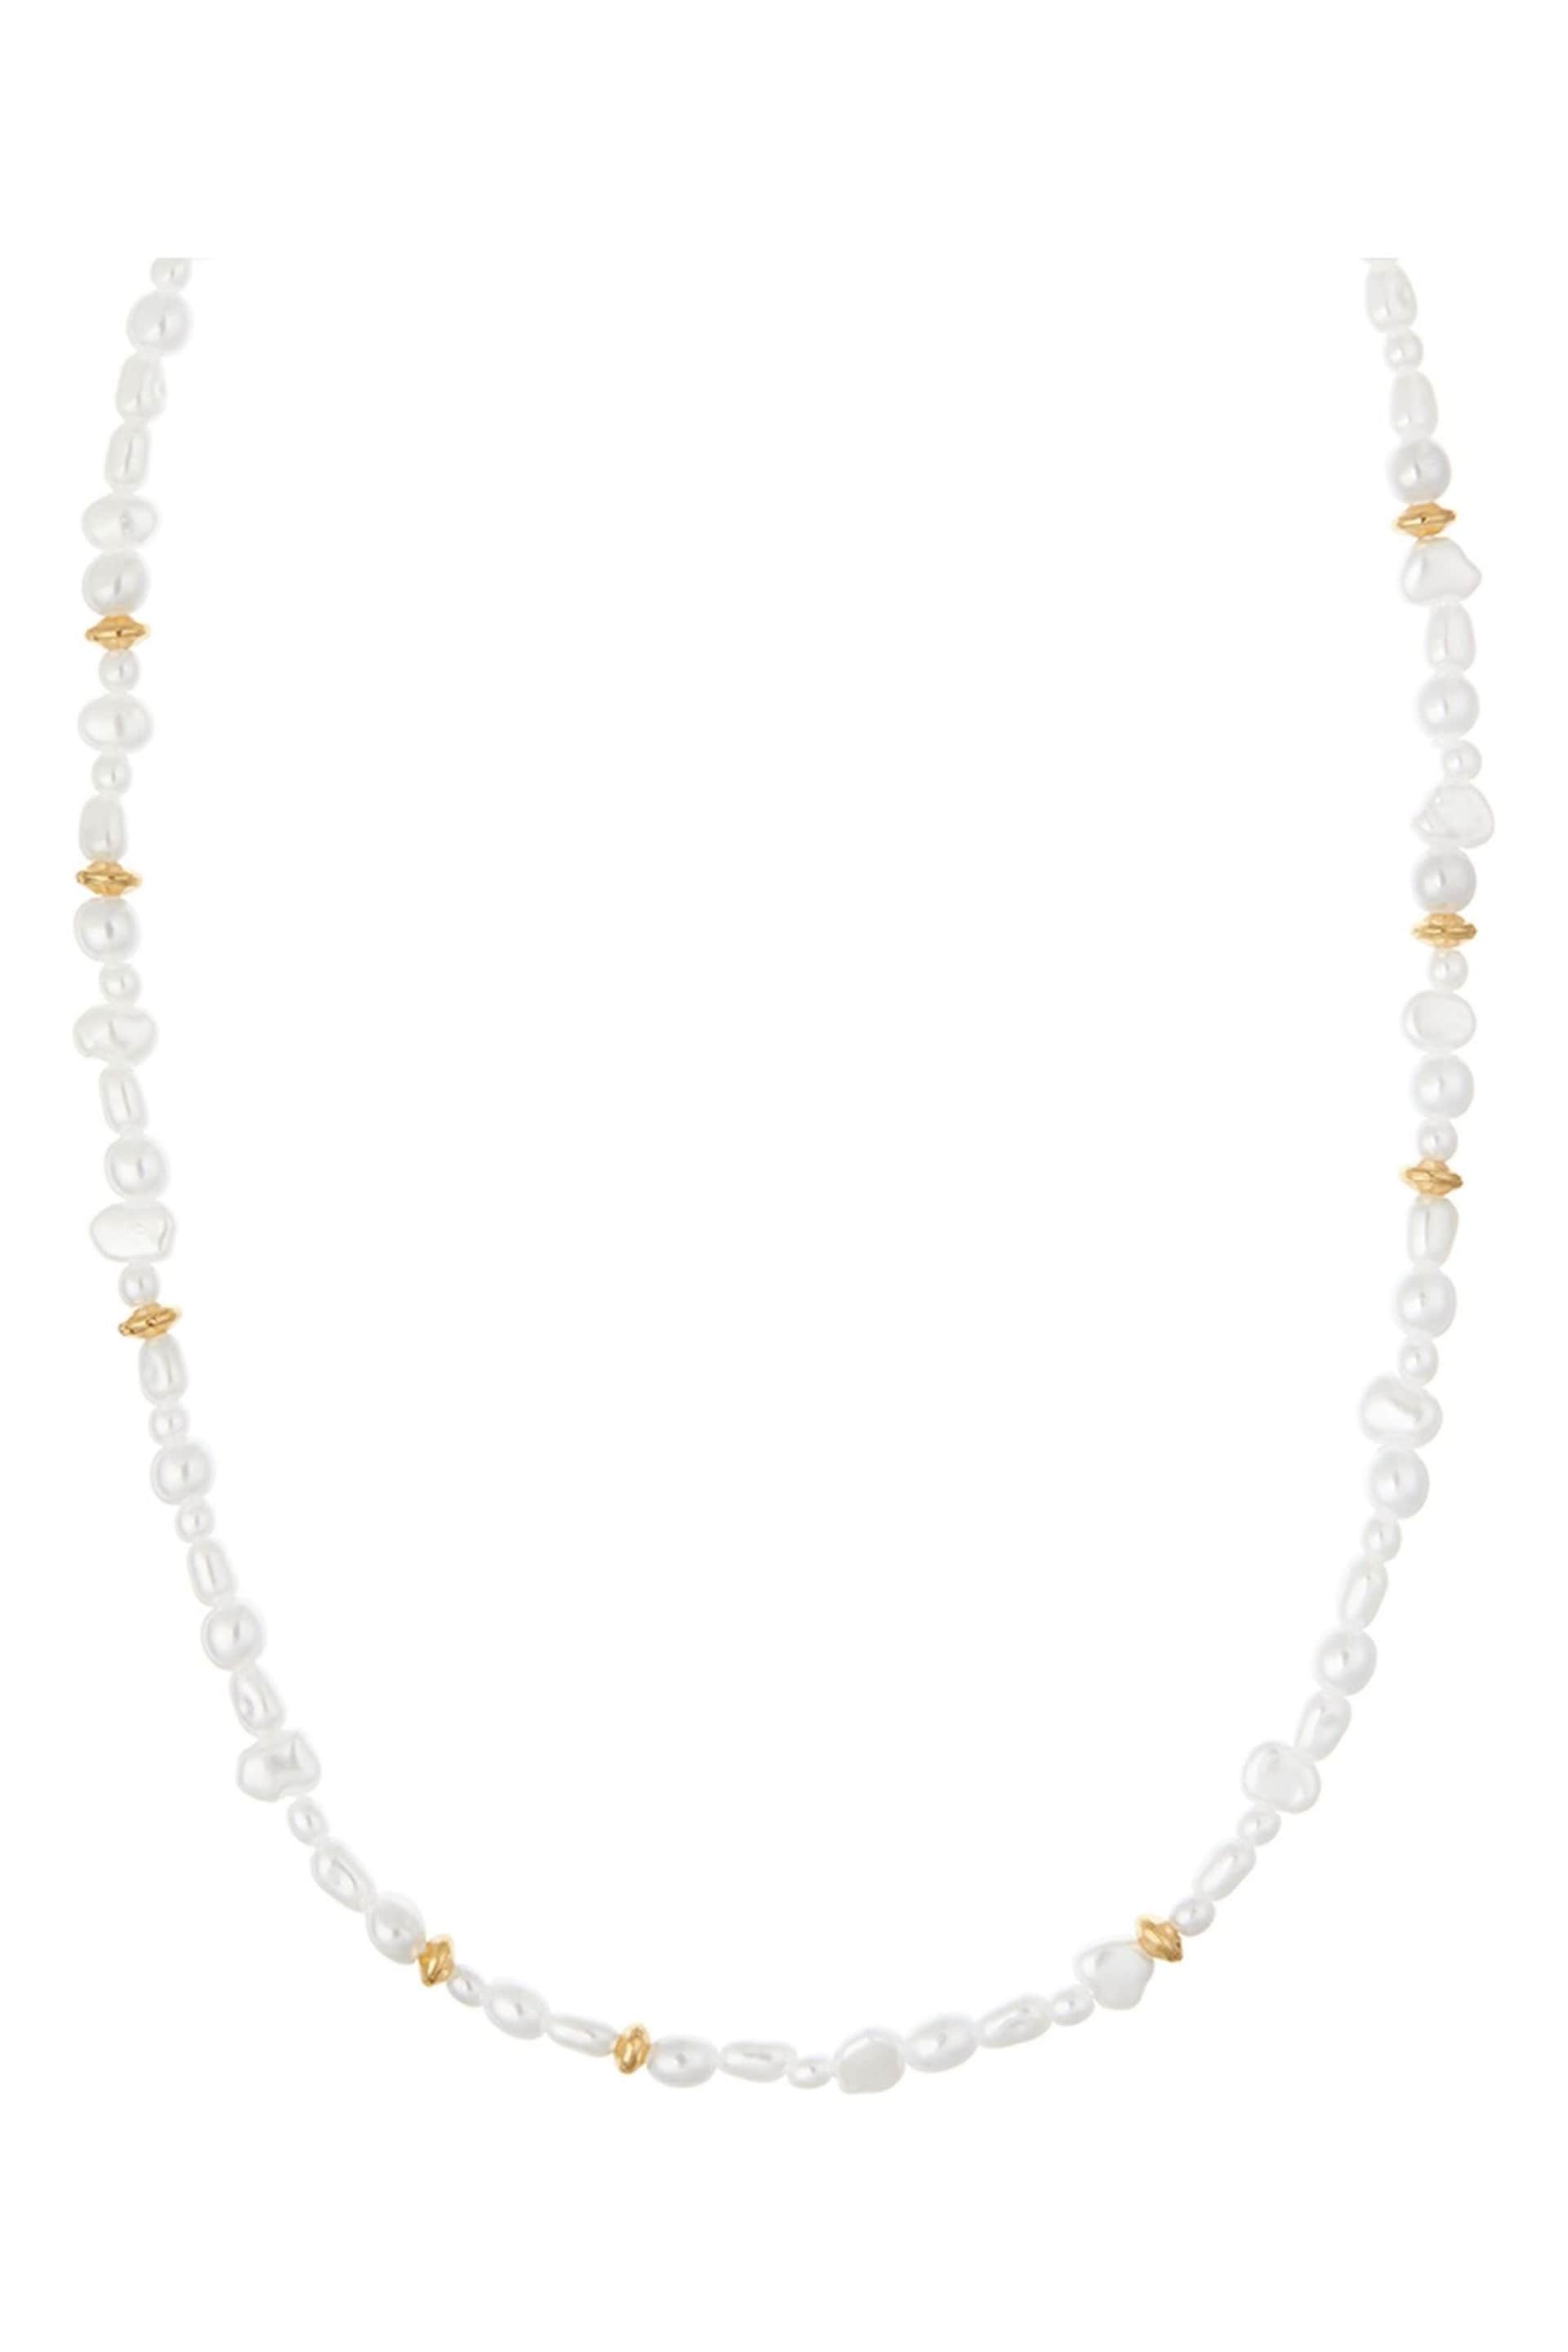 Orelia London Gold Plated Mixed Pearl & Bead Necklace - Image 2 of 3